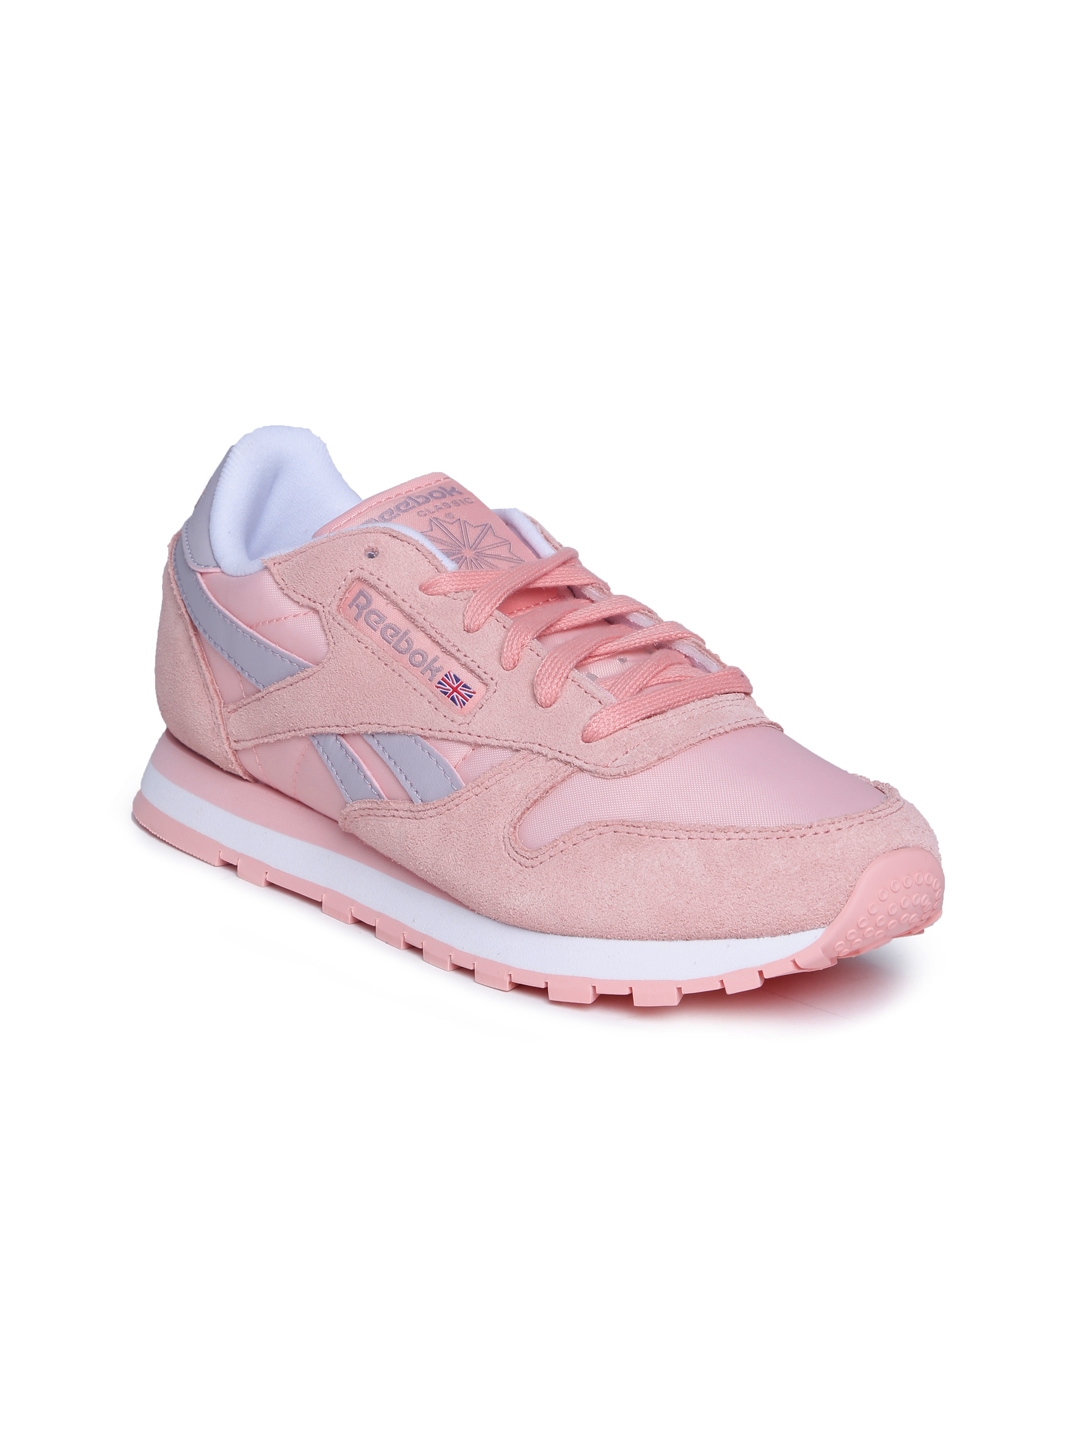 Buy Classic Women Baby Pink Suede Running Shoes - Sports Shoes for Women 549648 | Myntra